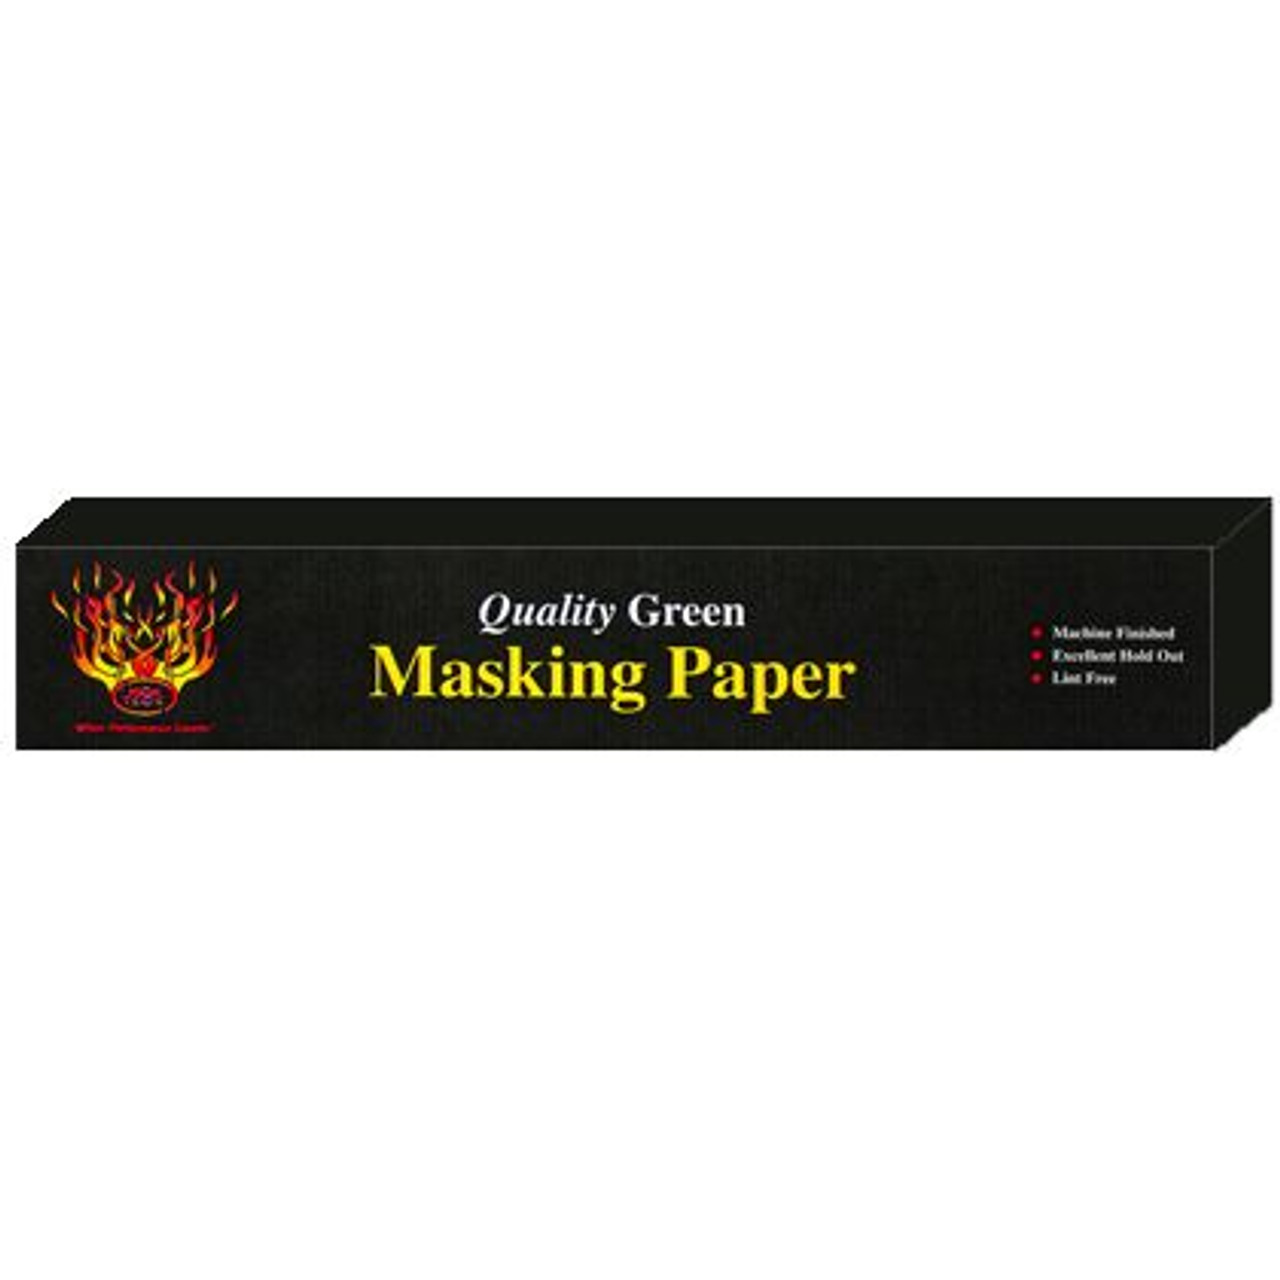 Quality Green Masking Paper, Weight: 28#, Size: 18" X 750'